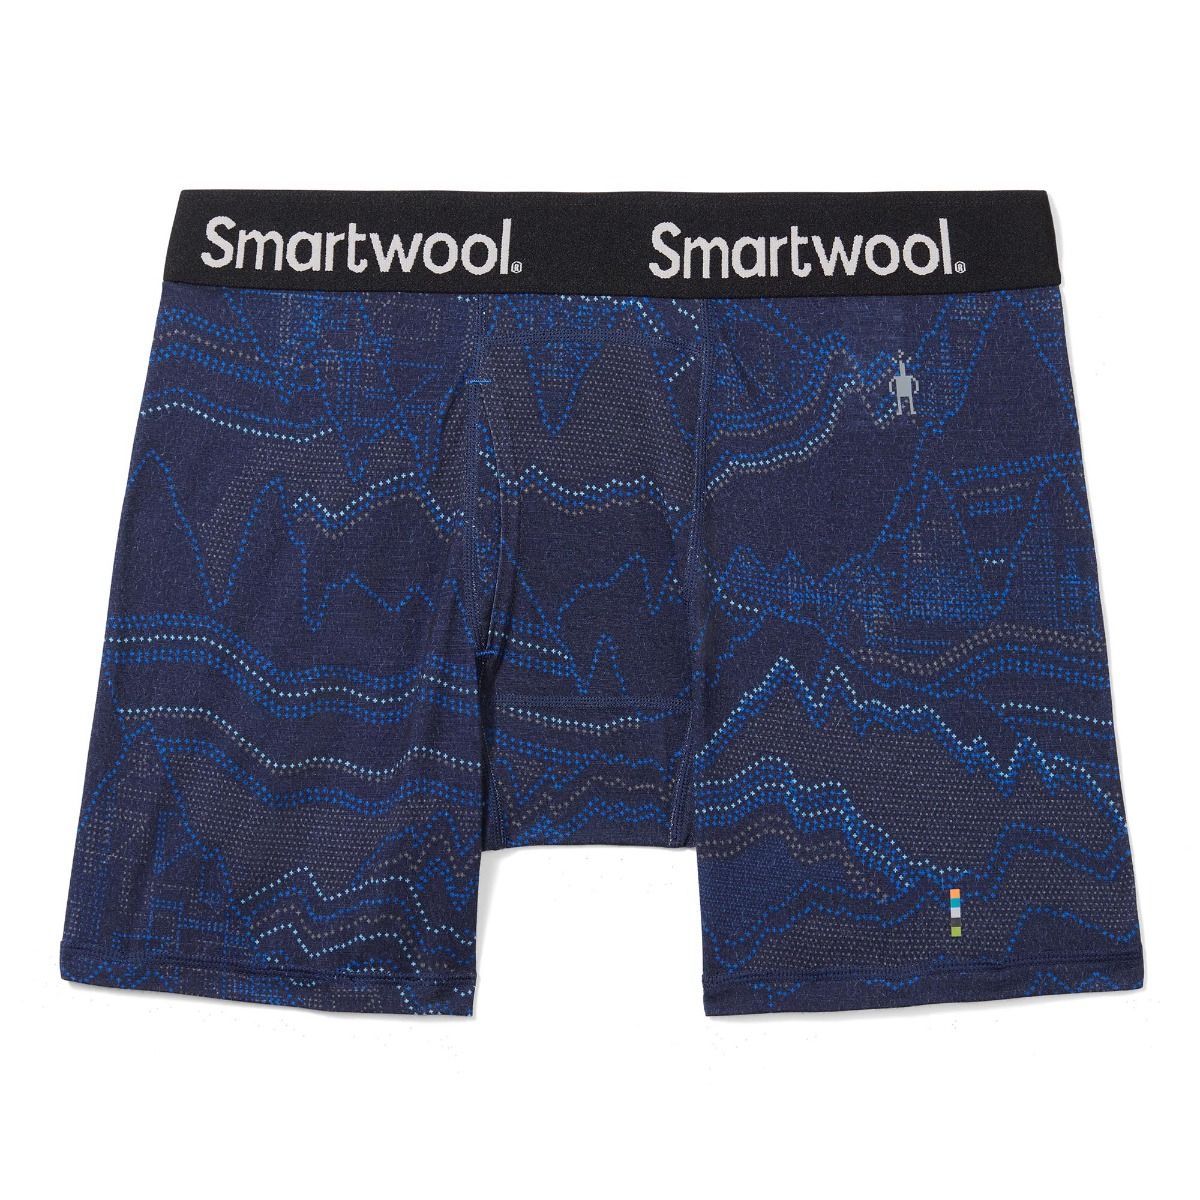 https://smartwool.ca/media/catalog/product/cache/7b241bfd6c26fd1ffc0d56d7717f5c2b/s/w/sw015557k98-1-p_1.jpg